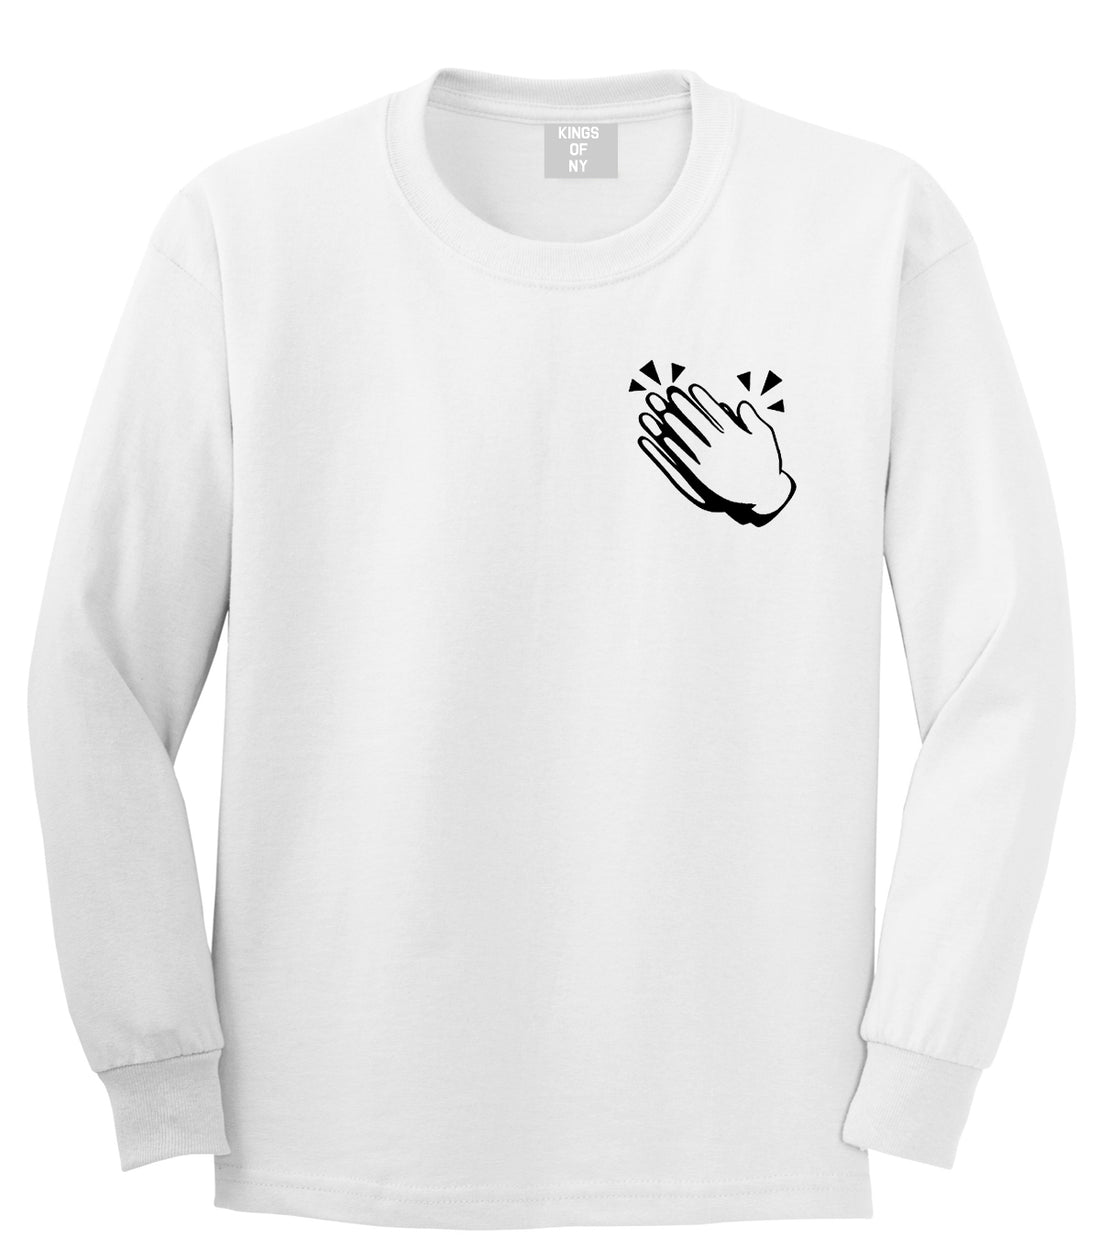 Clapping Hands Emoji Chest Mens White Long Sleeve T-Shirt by Kings Of NY